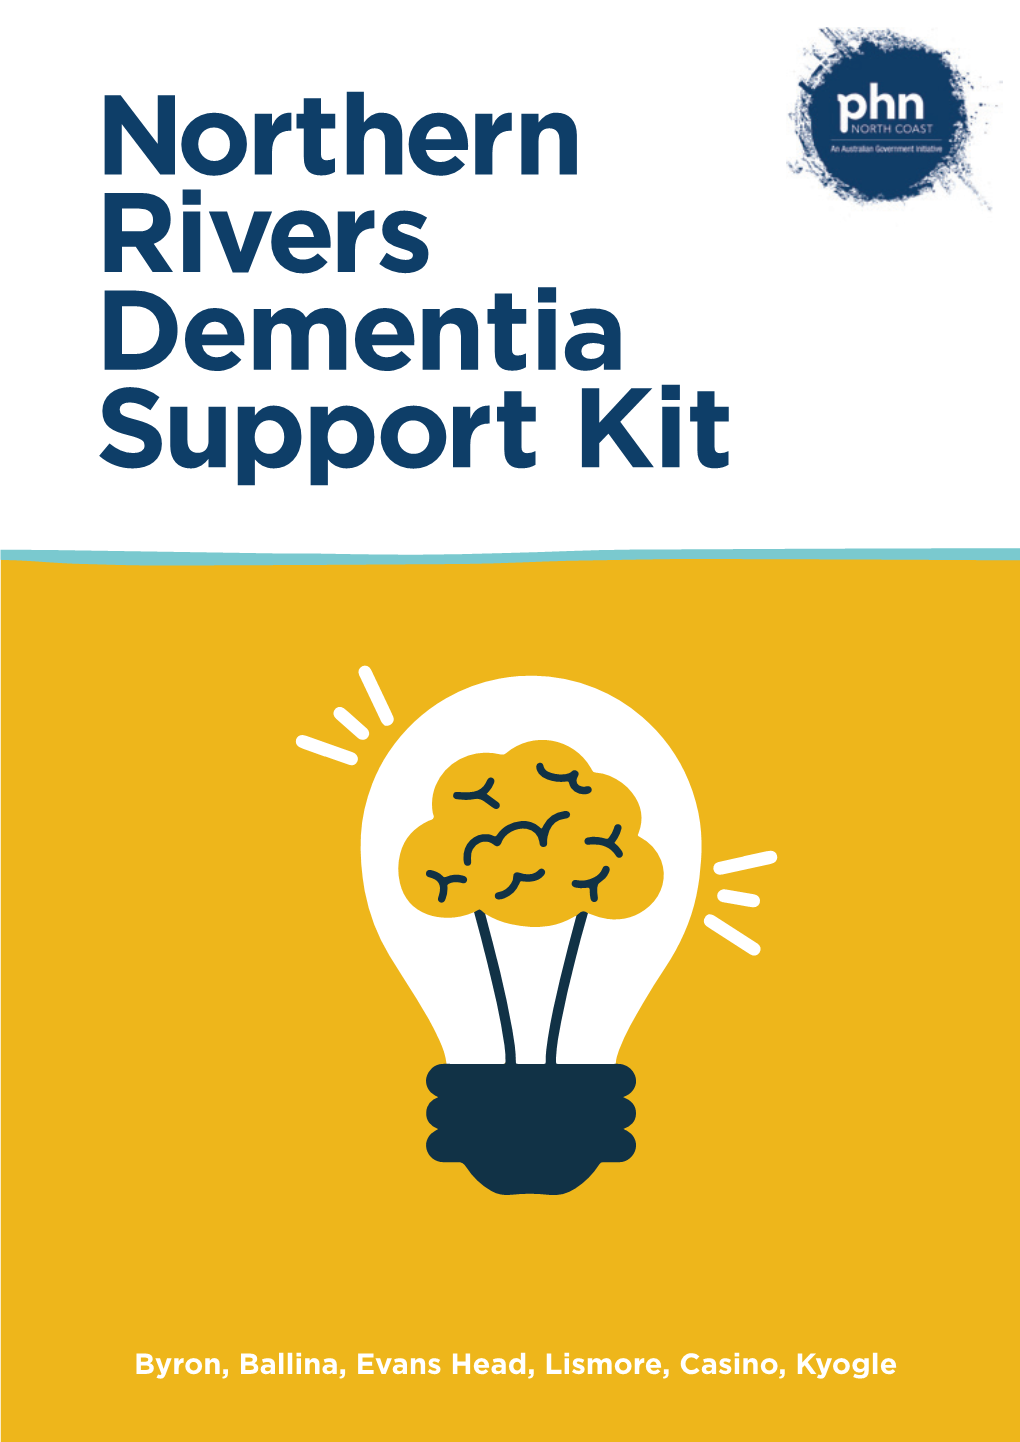 Northern Rivers Dementia Support Kit